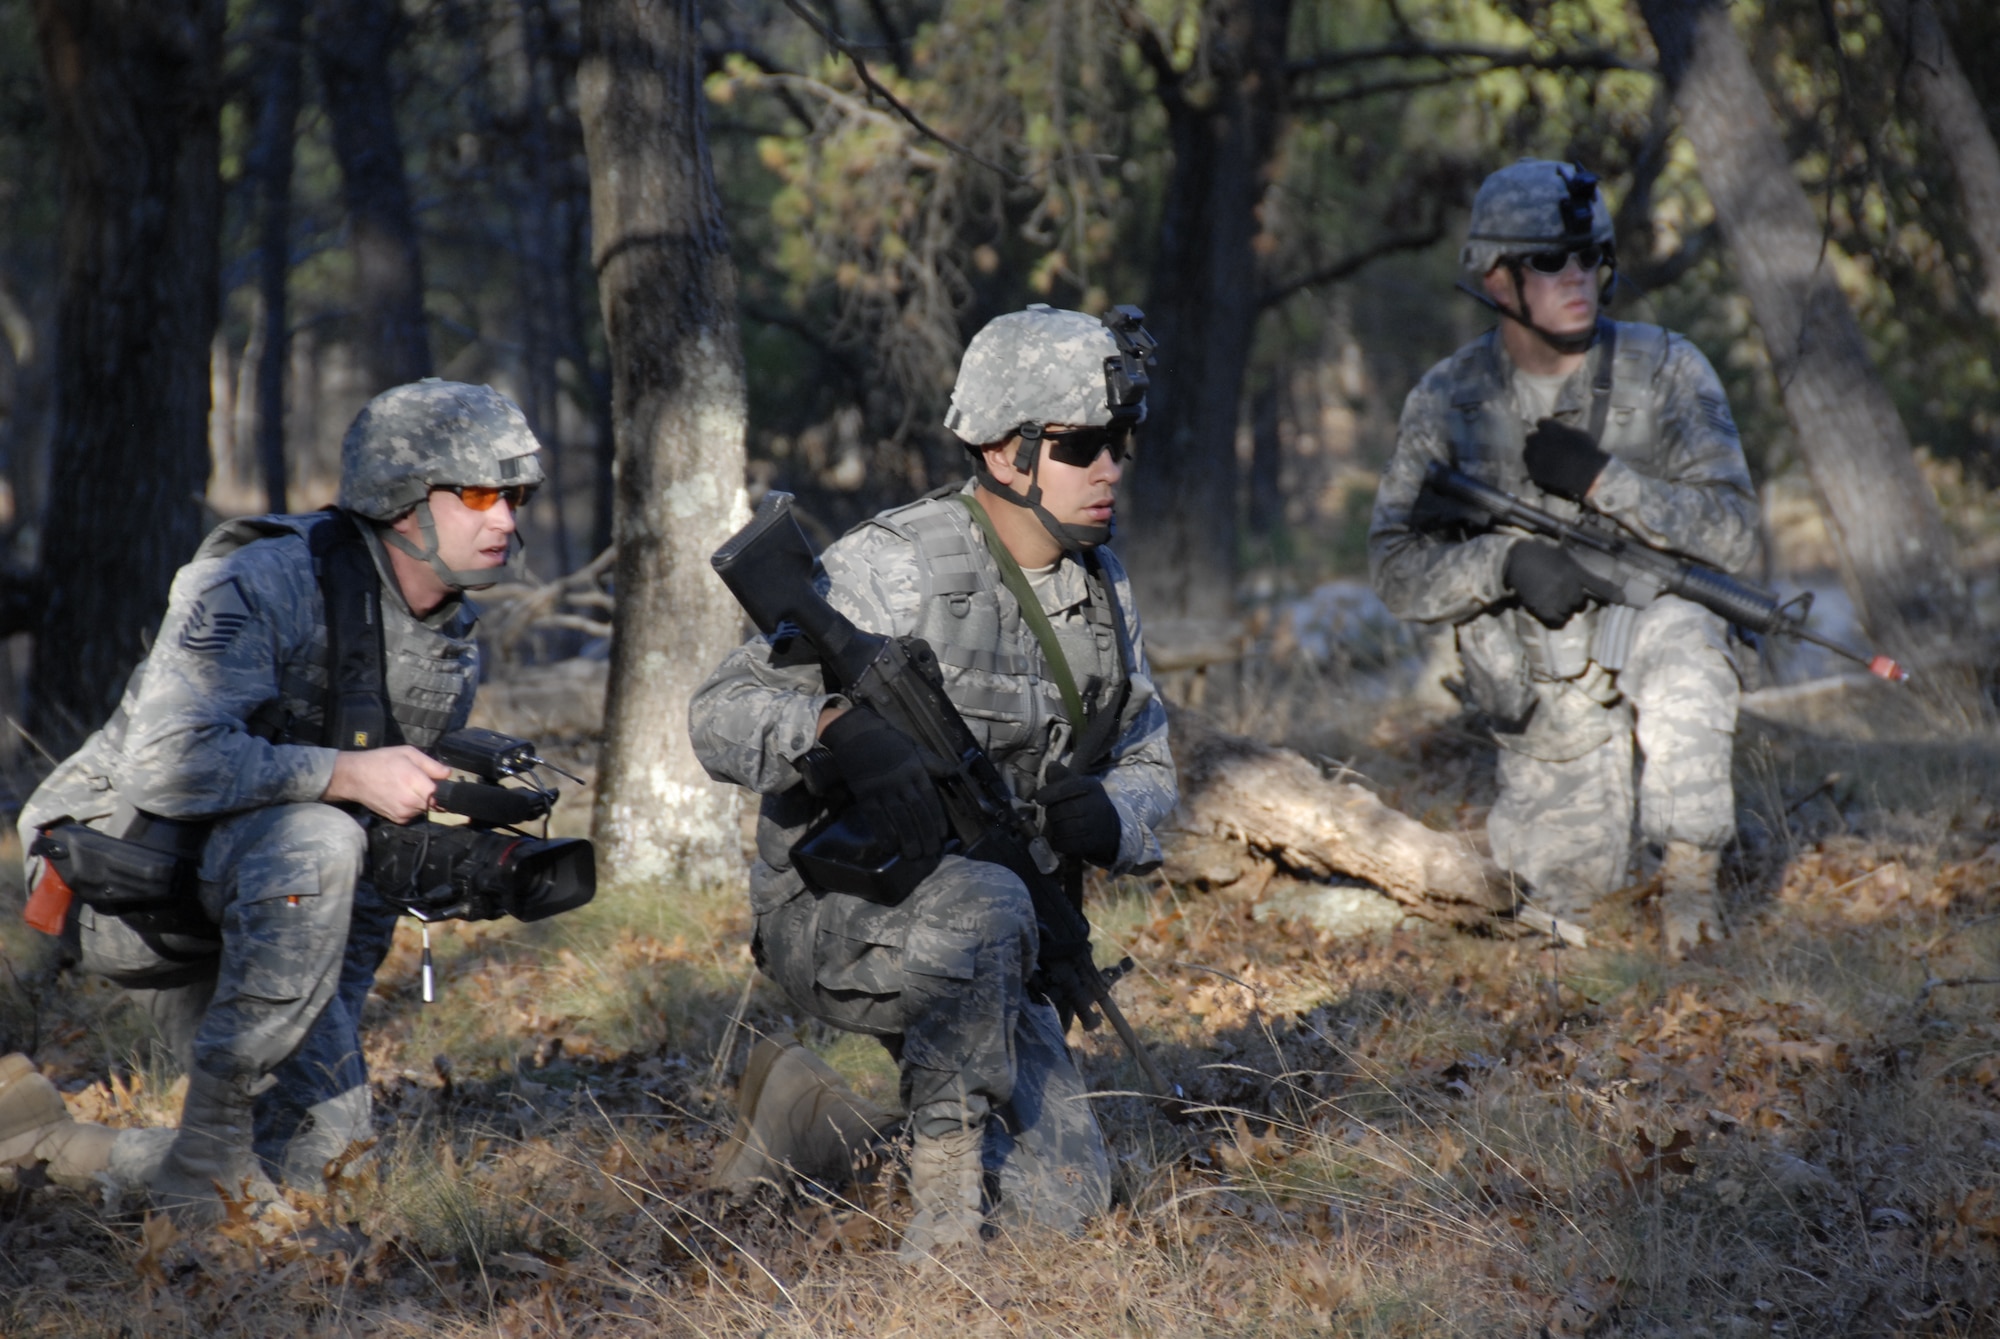 Master Sgt. Dan Richardson (left), broadcaster with the 115th Fighter Wing in Madison, Wis., looks on as Senior Airmen Nathan Ortiz (middle) and Tech Sgt. Kirk Flatten, Security Forces members assess a possible threat during a Security Forces exercise at Volk Field Combat Readiness Training Center Nov. 7, 2009. Three public affairs personnel from the 115th embedded with SF to learn how to effectively operate under the pressures of a combat environment.  The training proved beneficial to both sides as SF members learned ways to protect embedded assets while performing their regular duties.  (U.S. Air Force Photo by Tech. Sgt. Don Nelson)